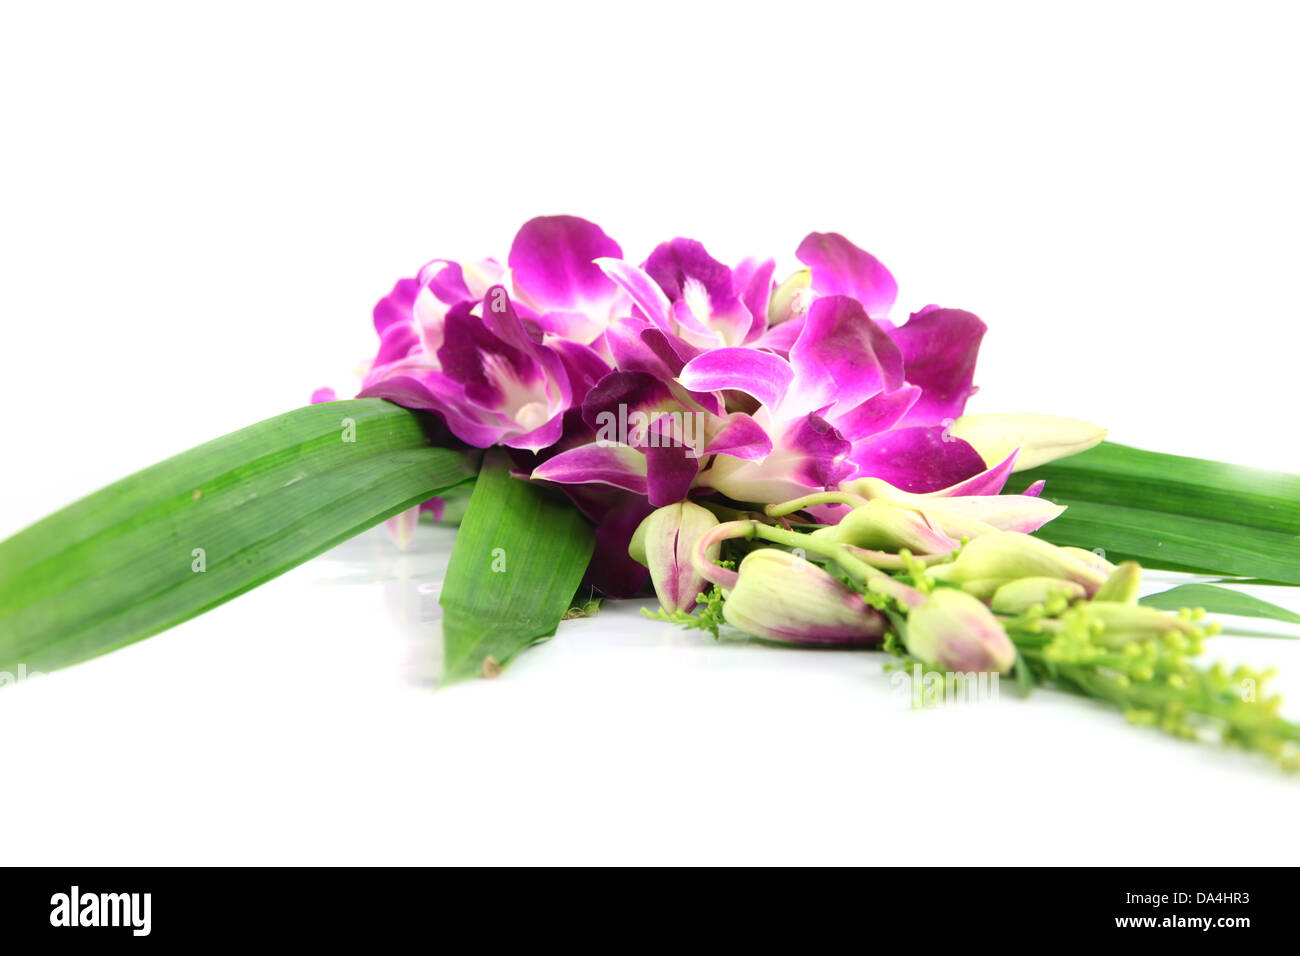 The Bouquet of purple orchids on white Background. Stock Photo